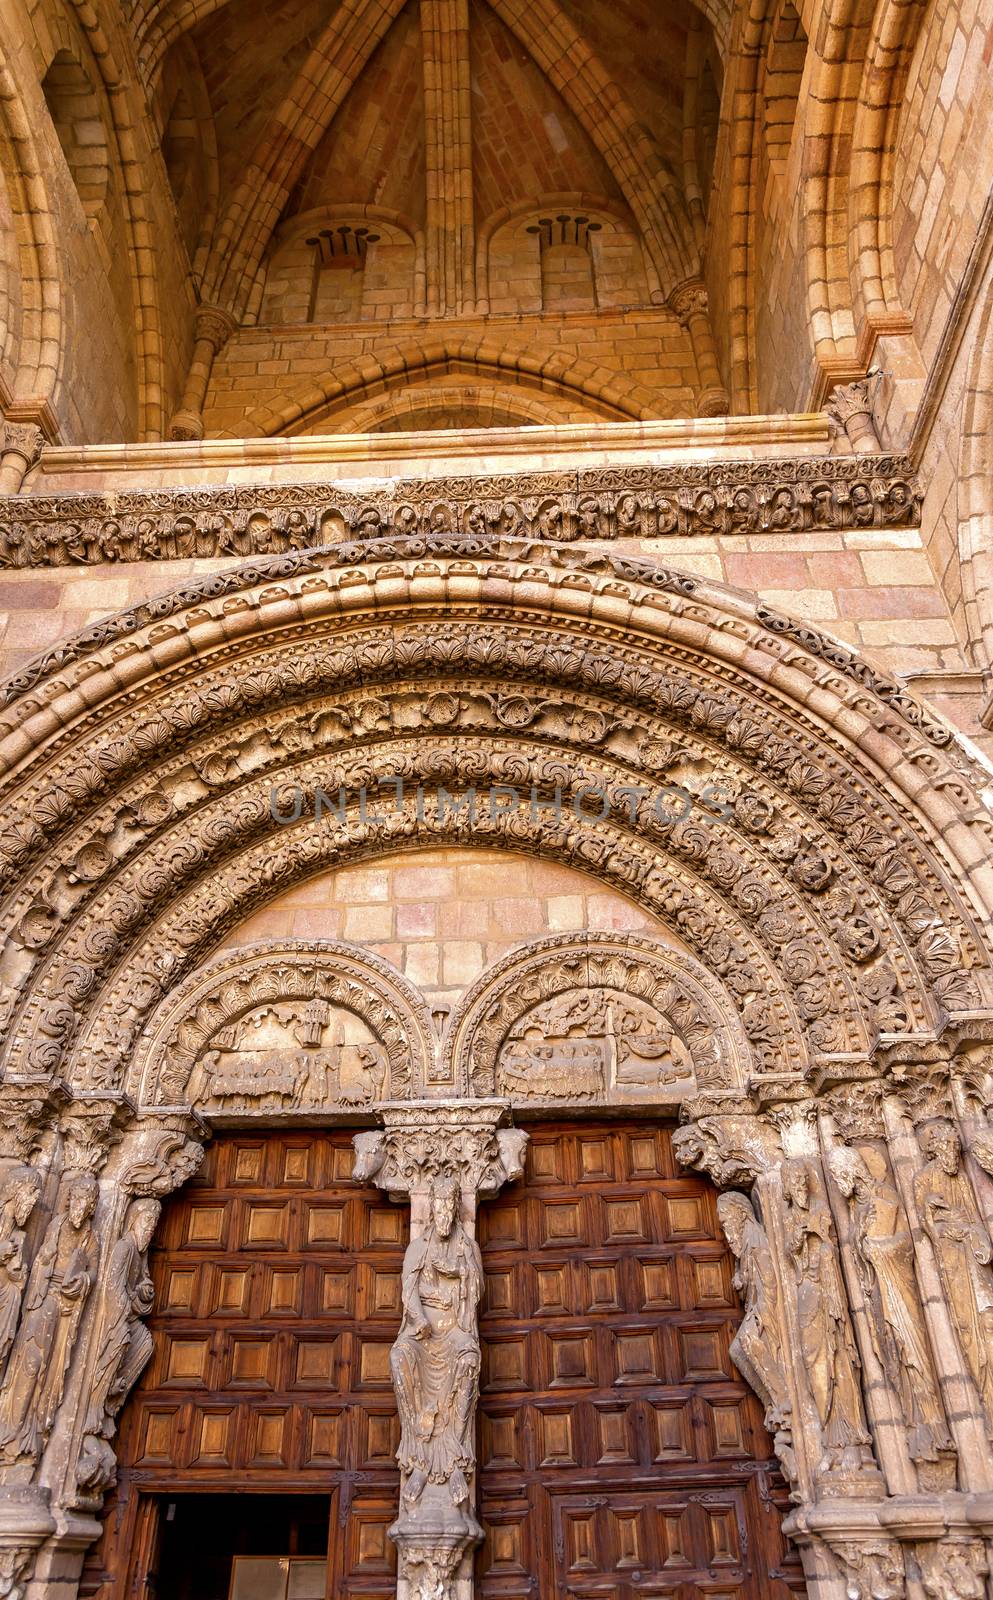 Cathedral Door Avila Castile Spain  Gothic church built in the 1100s.  Avila is a an ancient walled medieval city in Spain.  